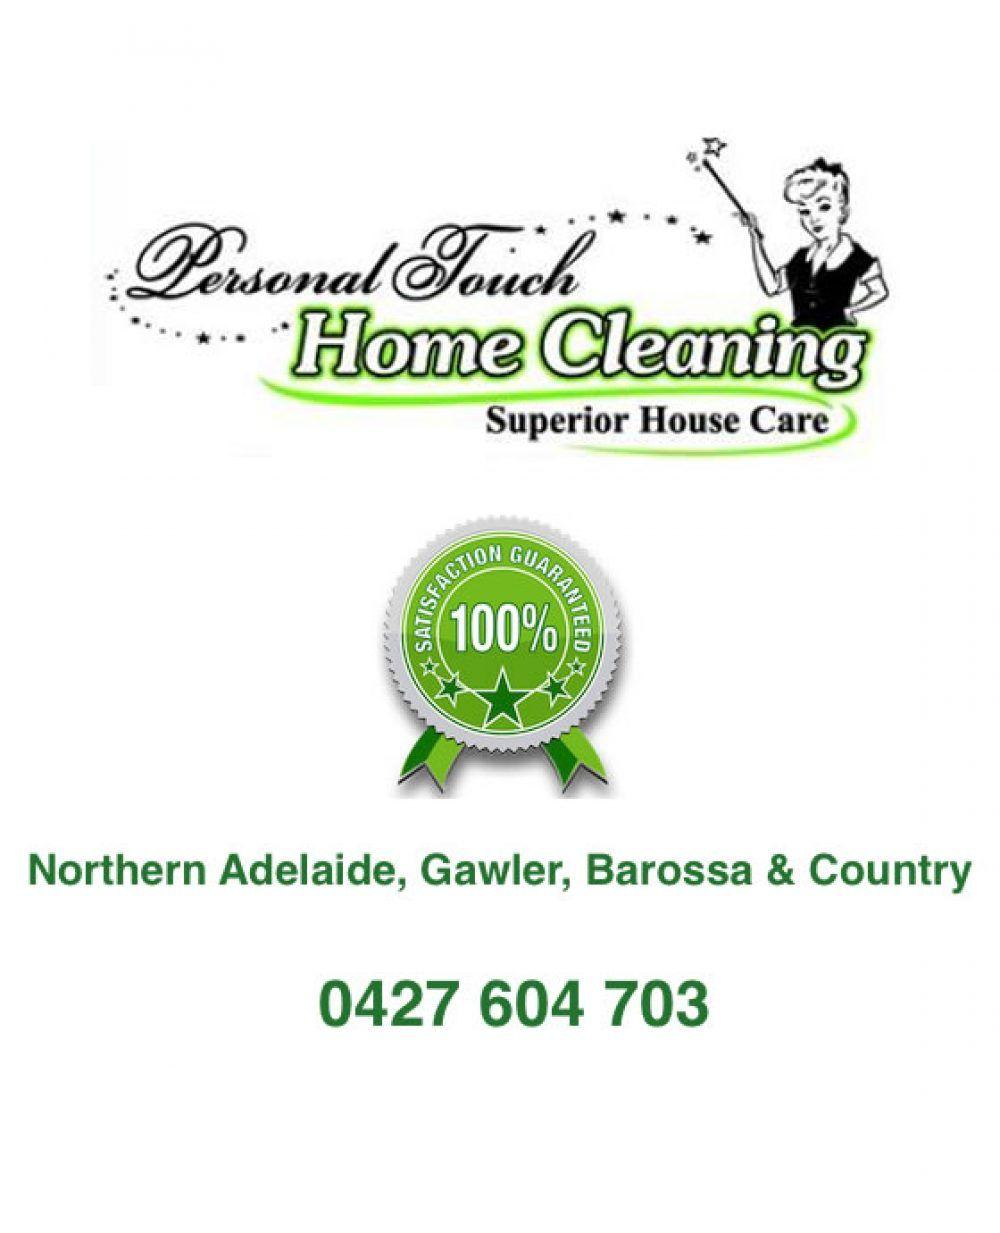 Personal Touch Home Care Logo - Personal Touch Home Cleaning - Gawler Business Development Group